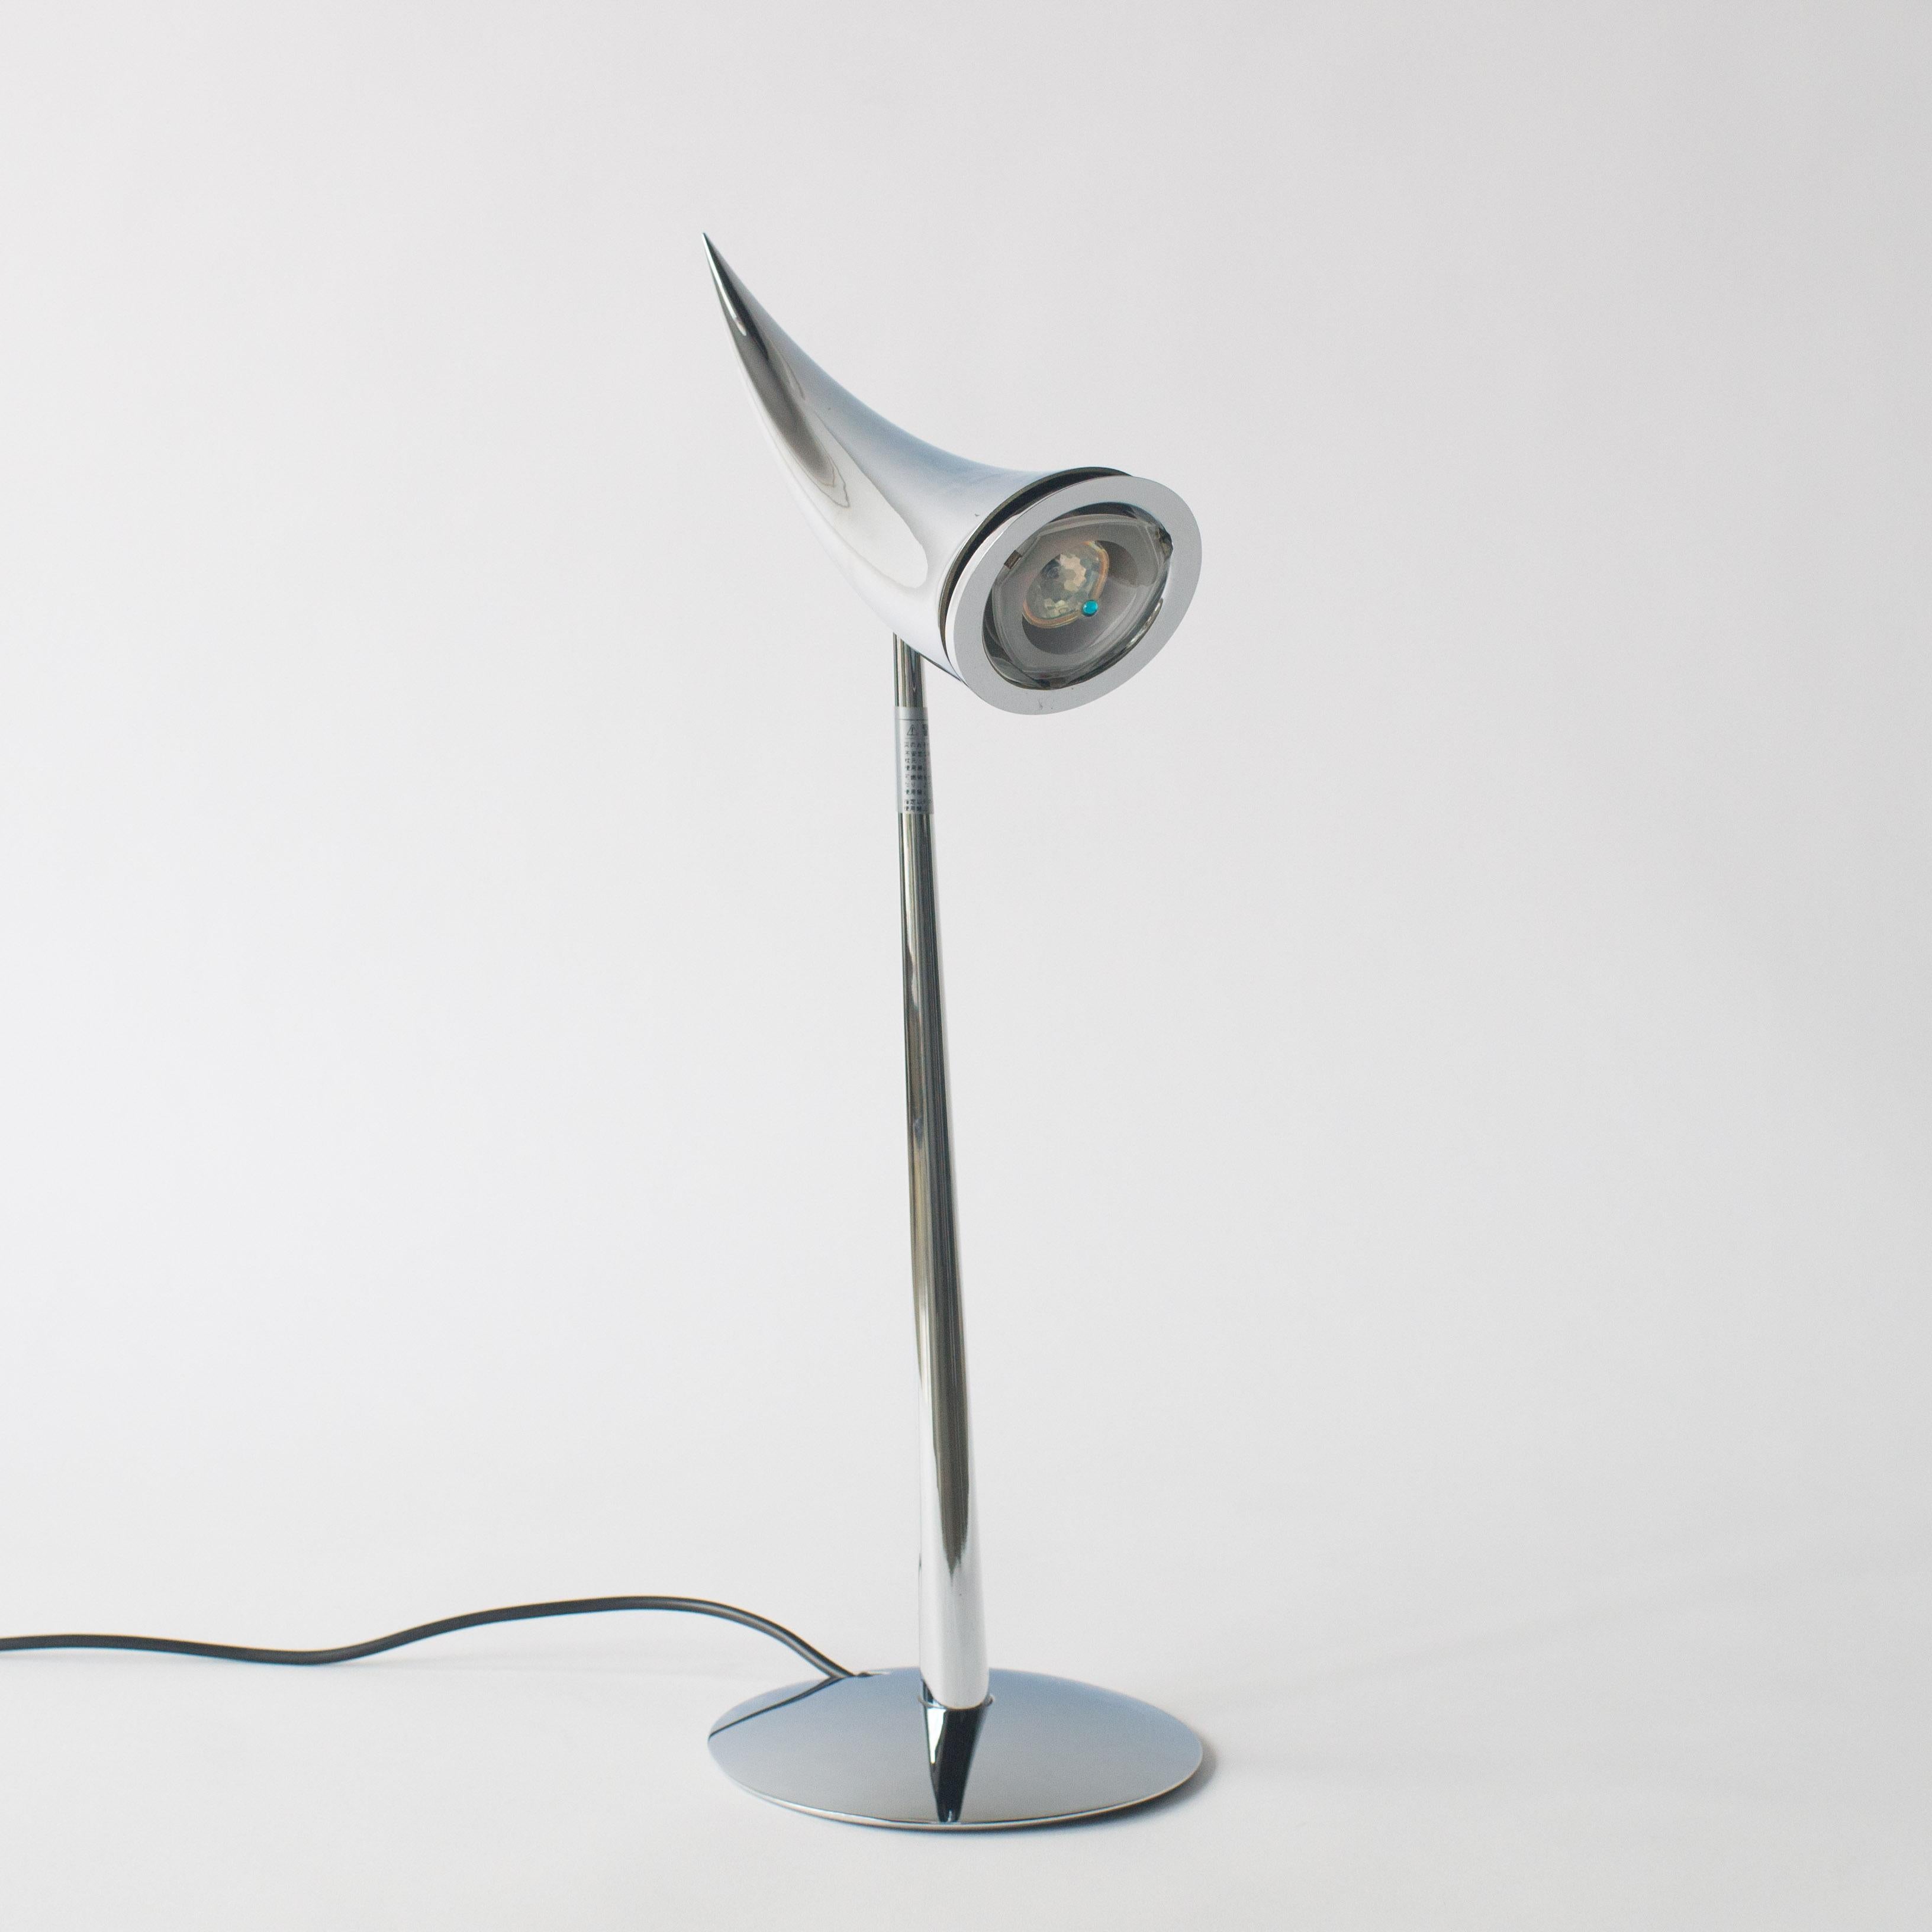 Ara desk lamp designed by Philippe Starck for Flos.
Usable with 100-120V, in the US.